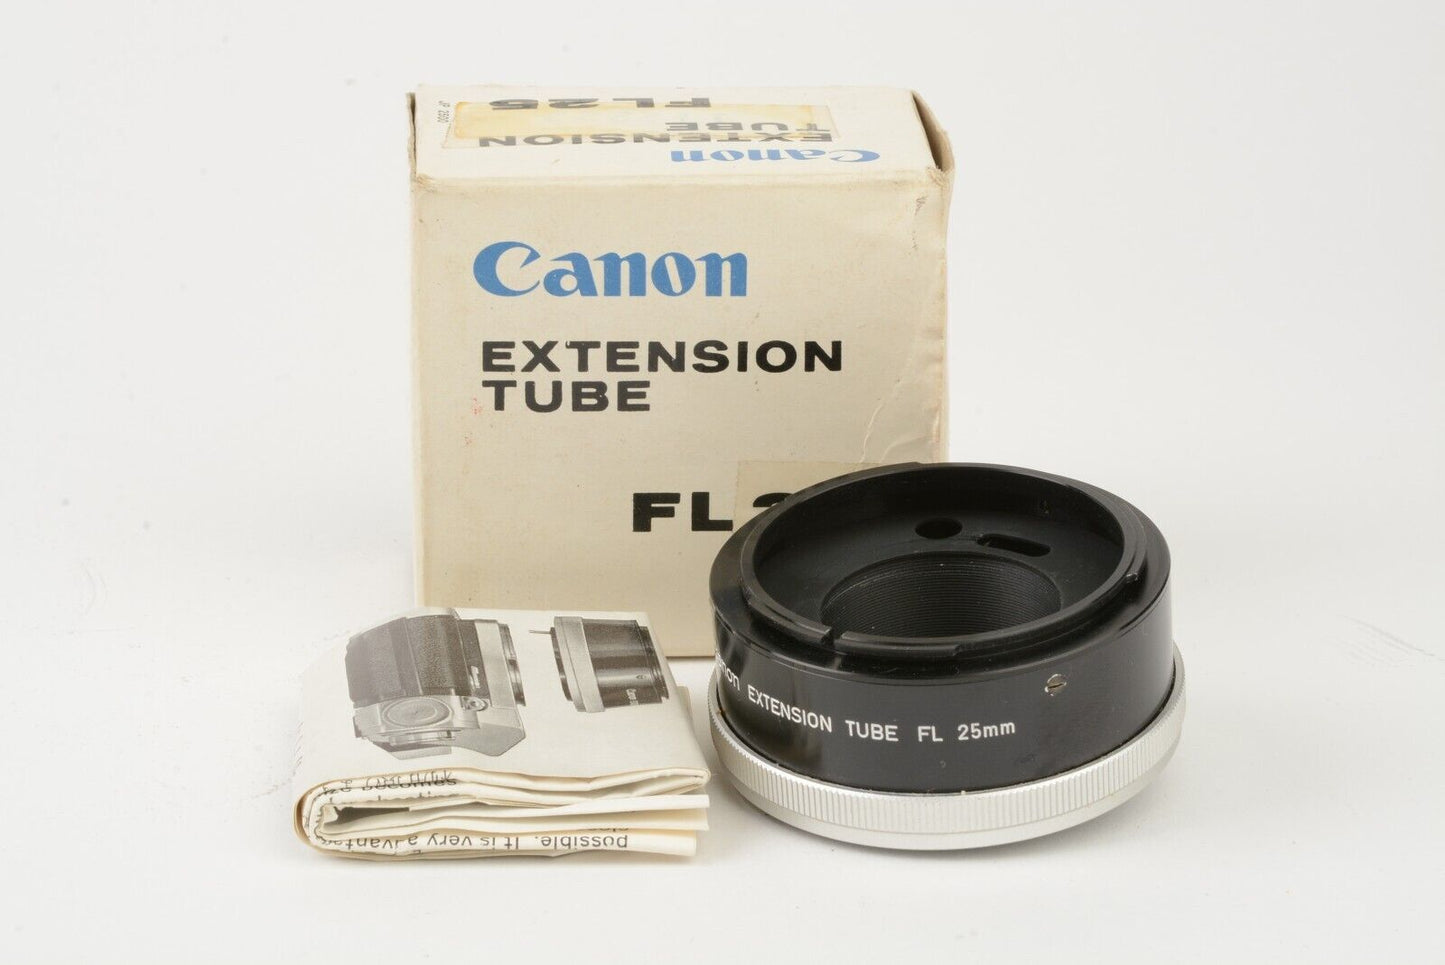 EXC++ CANON FL25 EXTENSION TUBE, BOXED, VERY CLEAN, INSTRUCTIONS